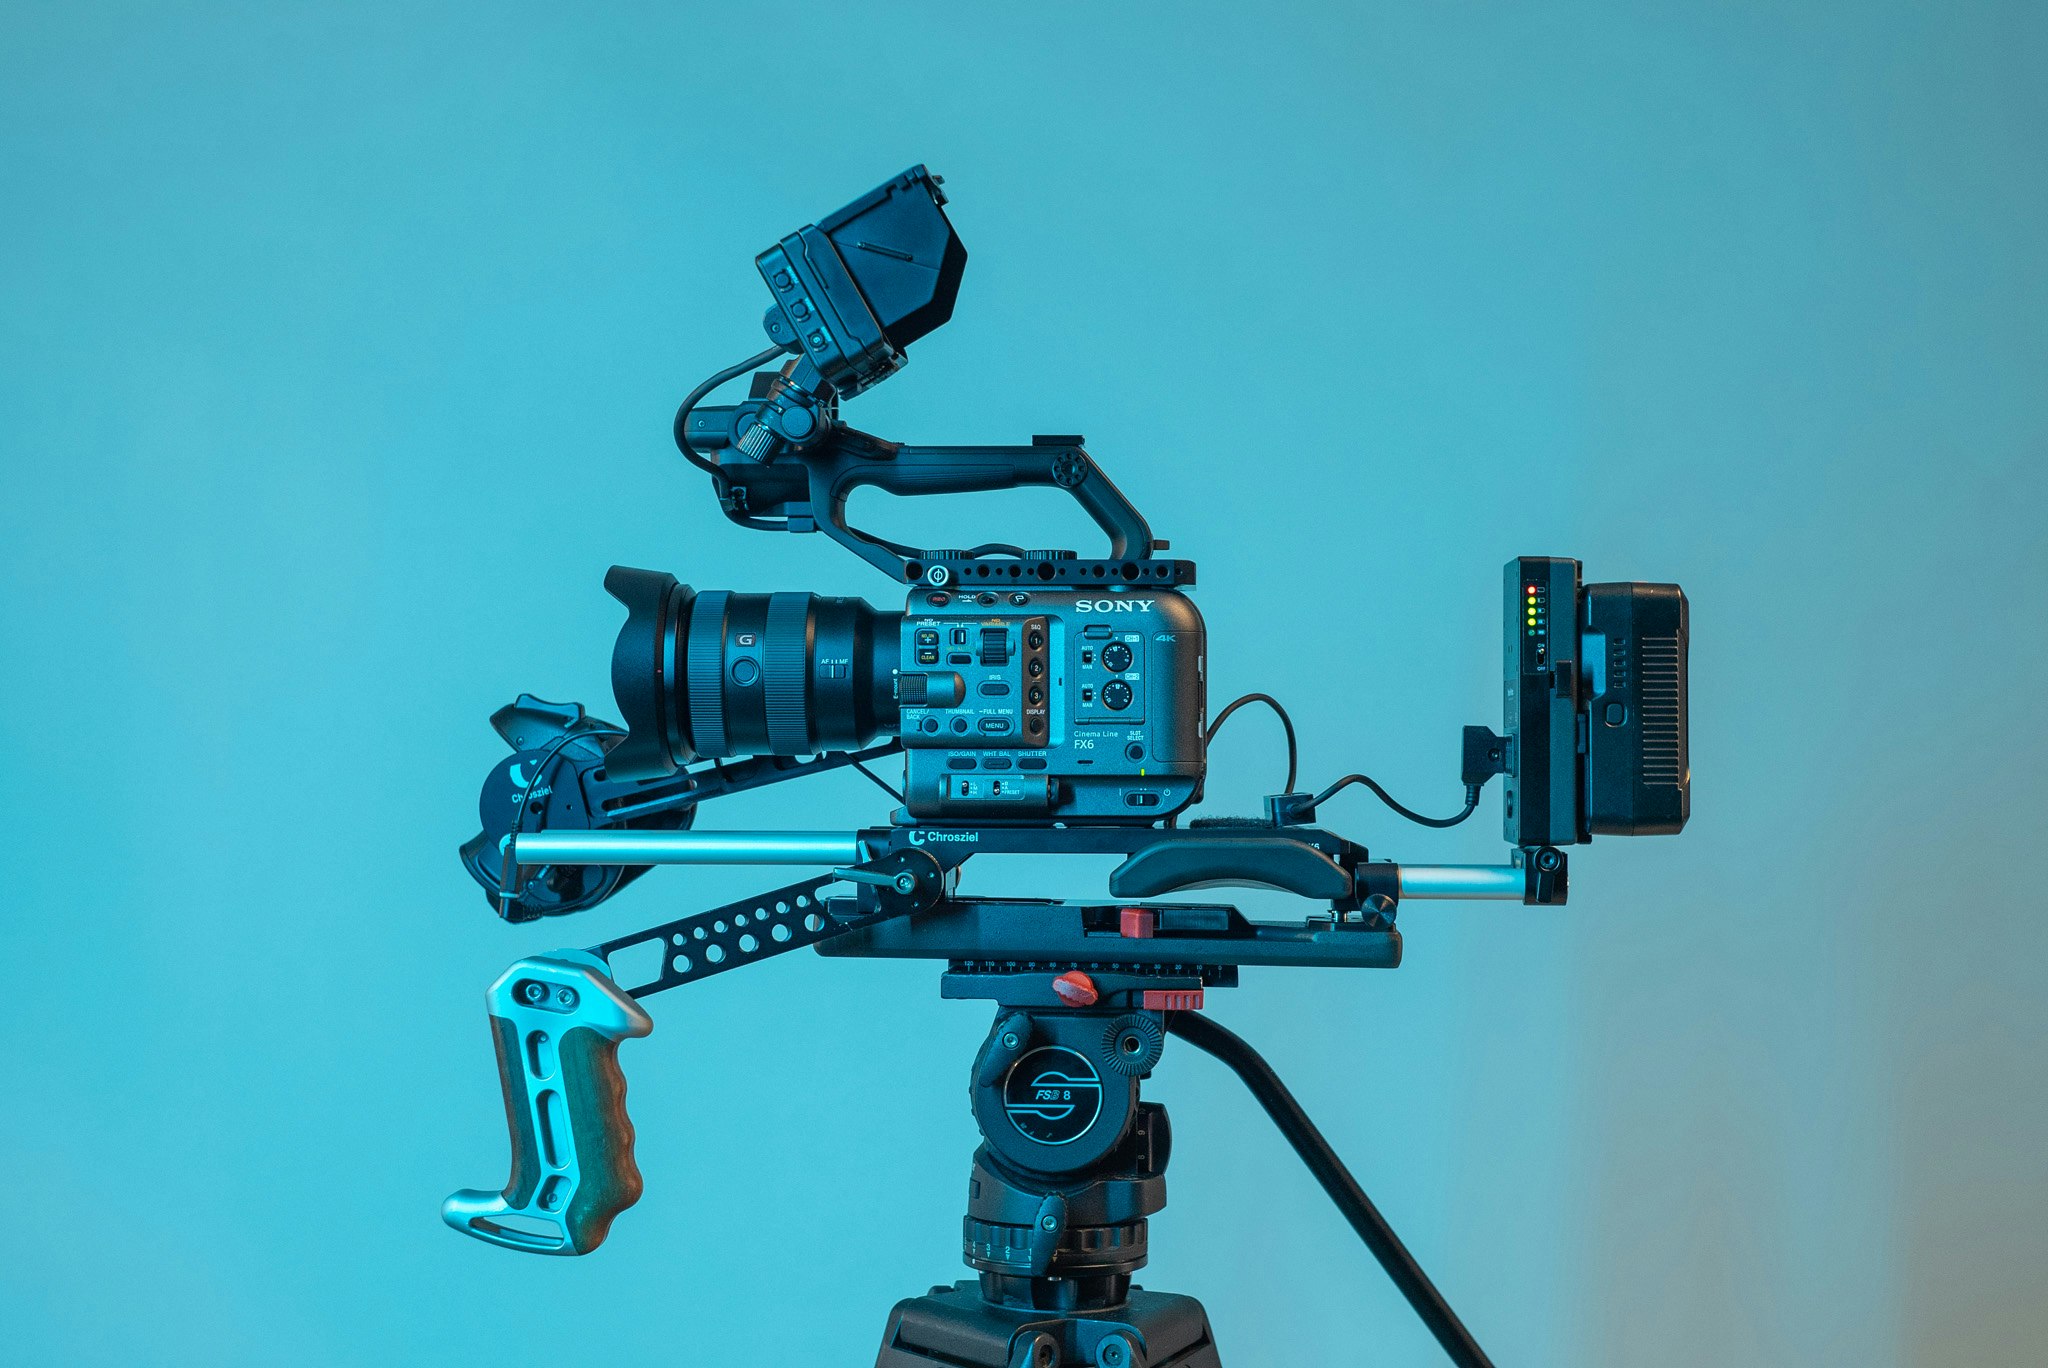 Rigged FX6 with V-mount ready to support external monitor and wireless image transmission